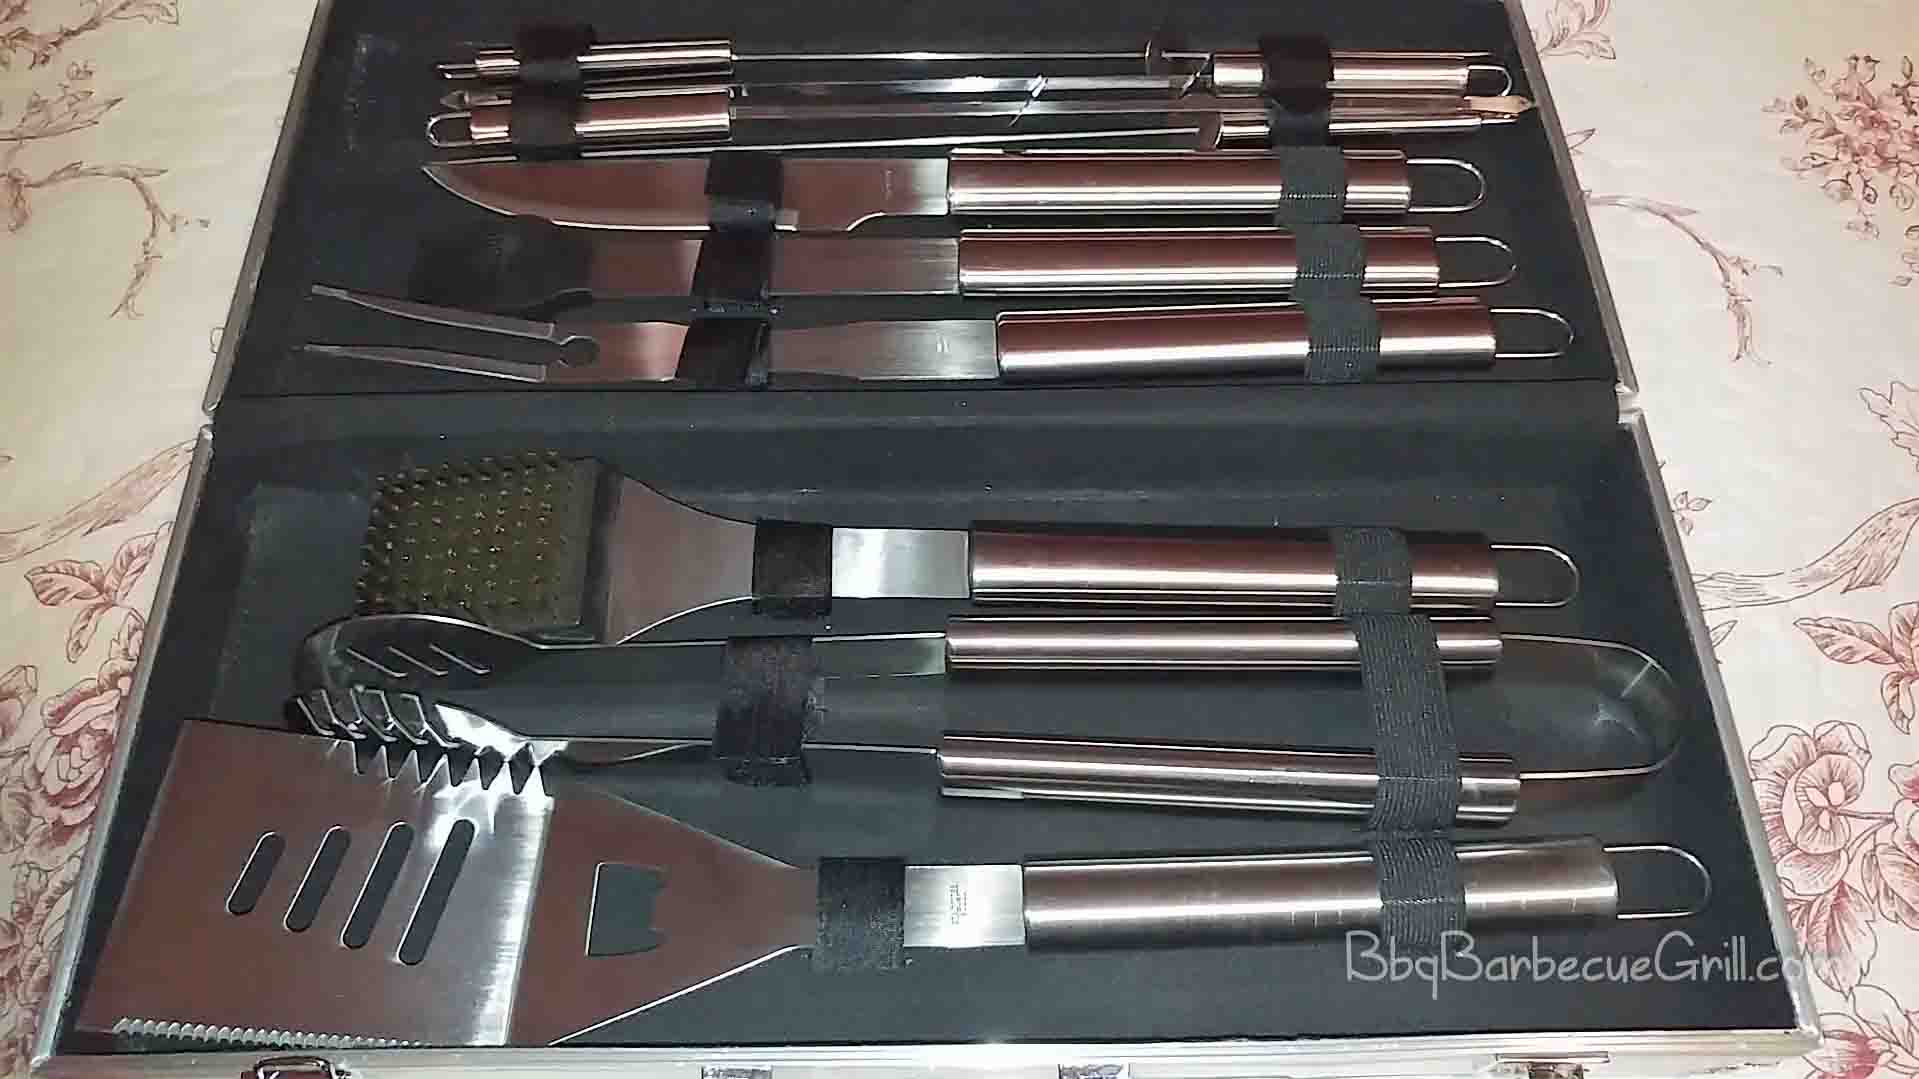 Best stainless steel grill set